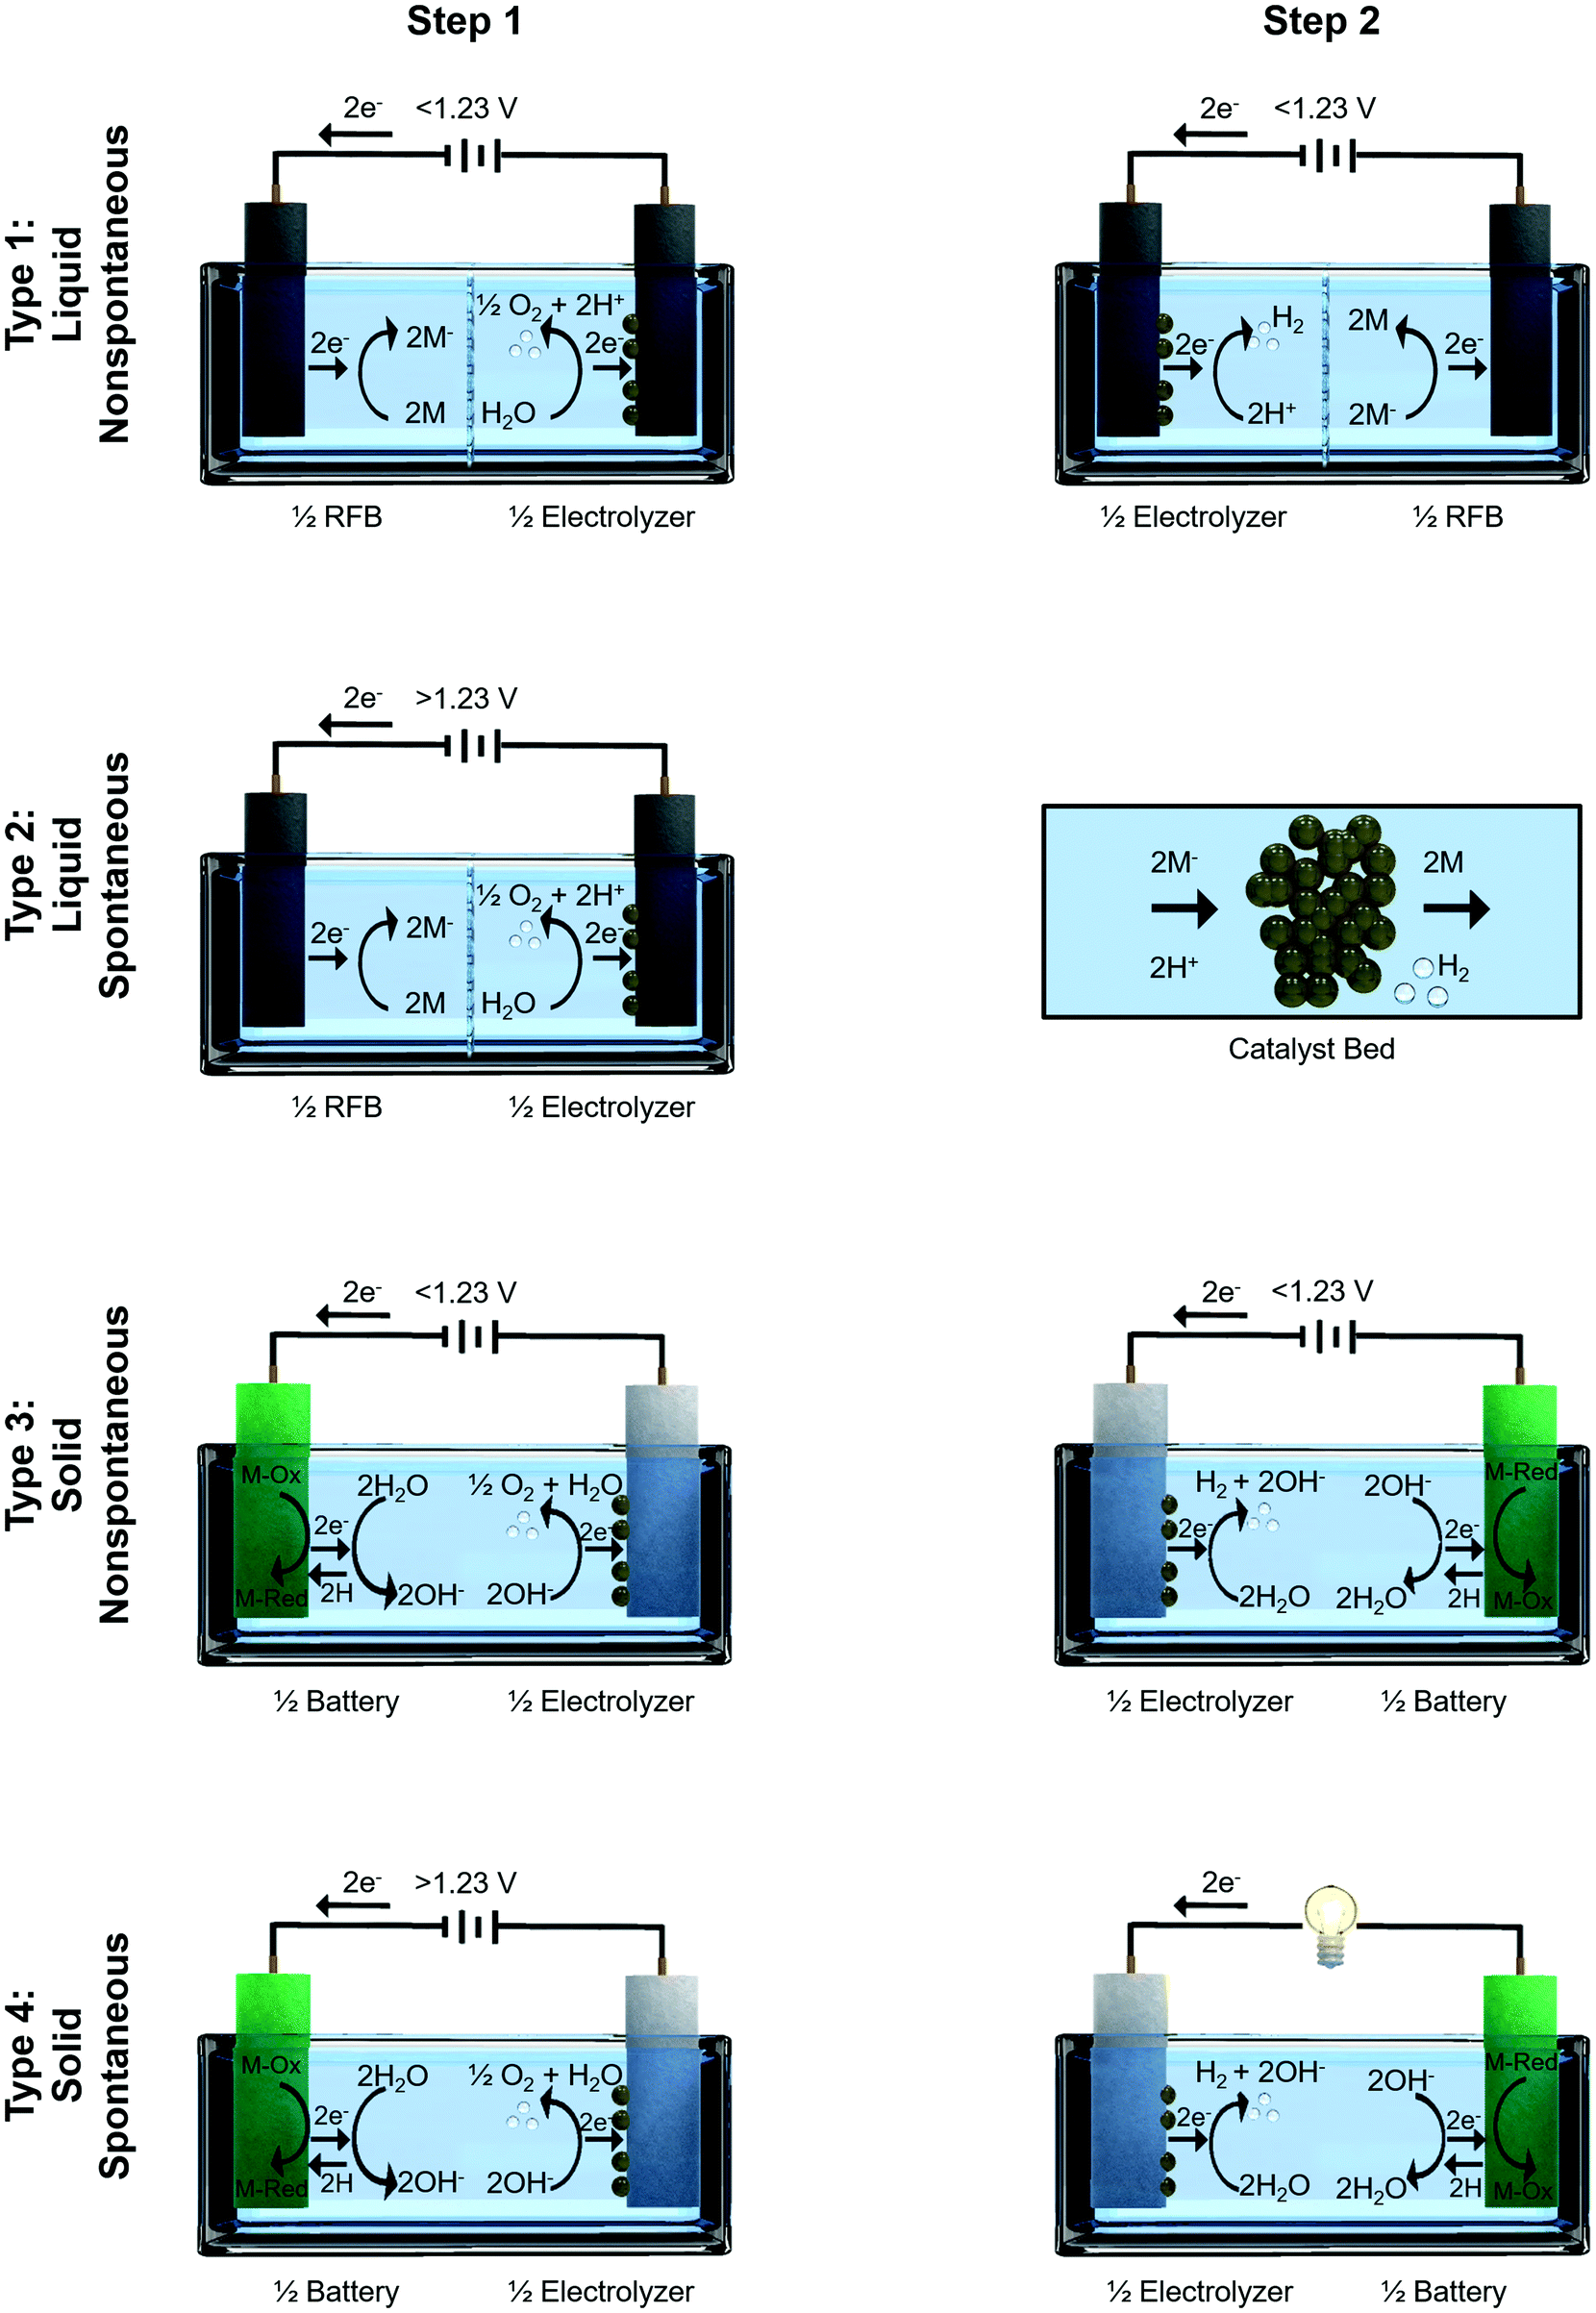 Electrochemical and chemical cycle for high-efficiency decoupled water  splitting in a near-neutral electrolyte